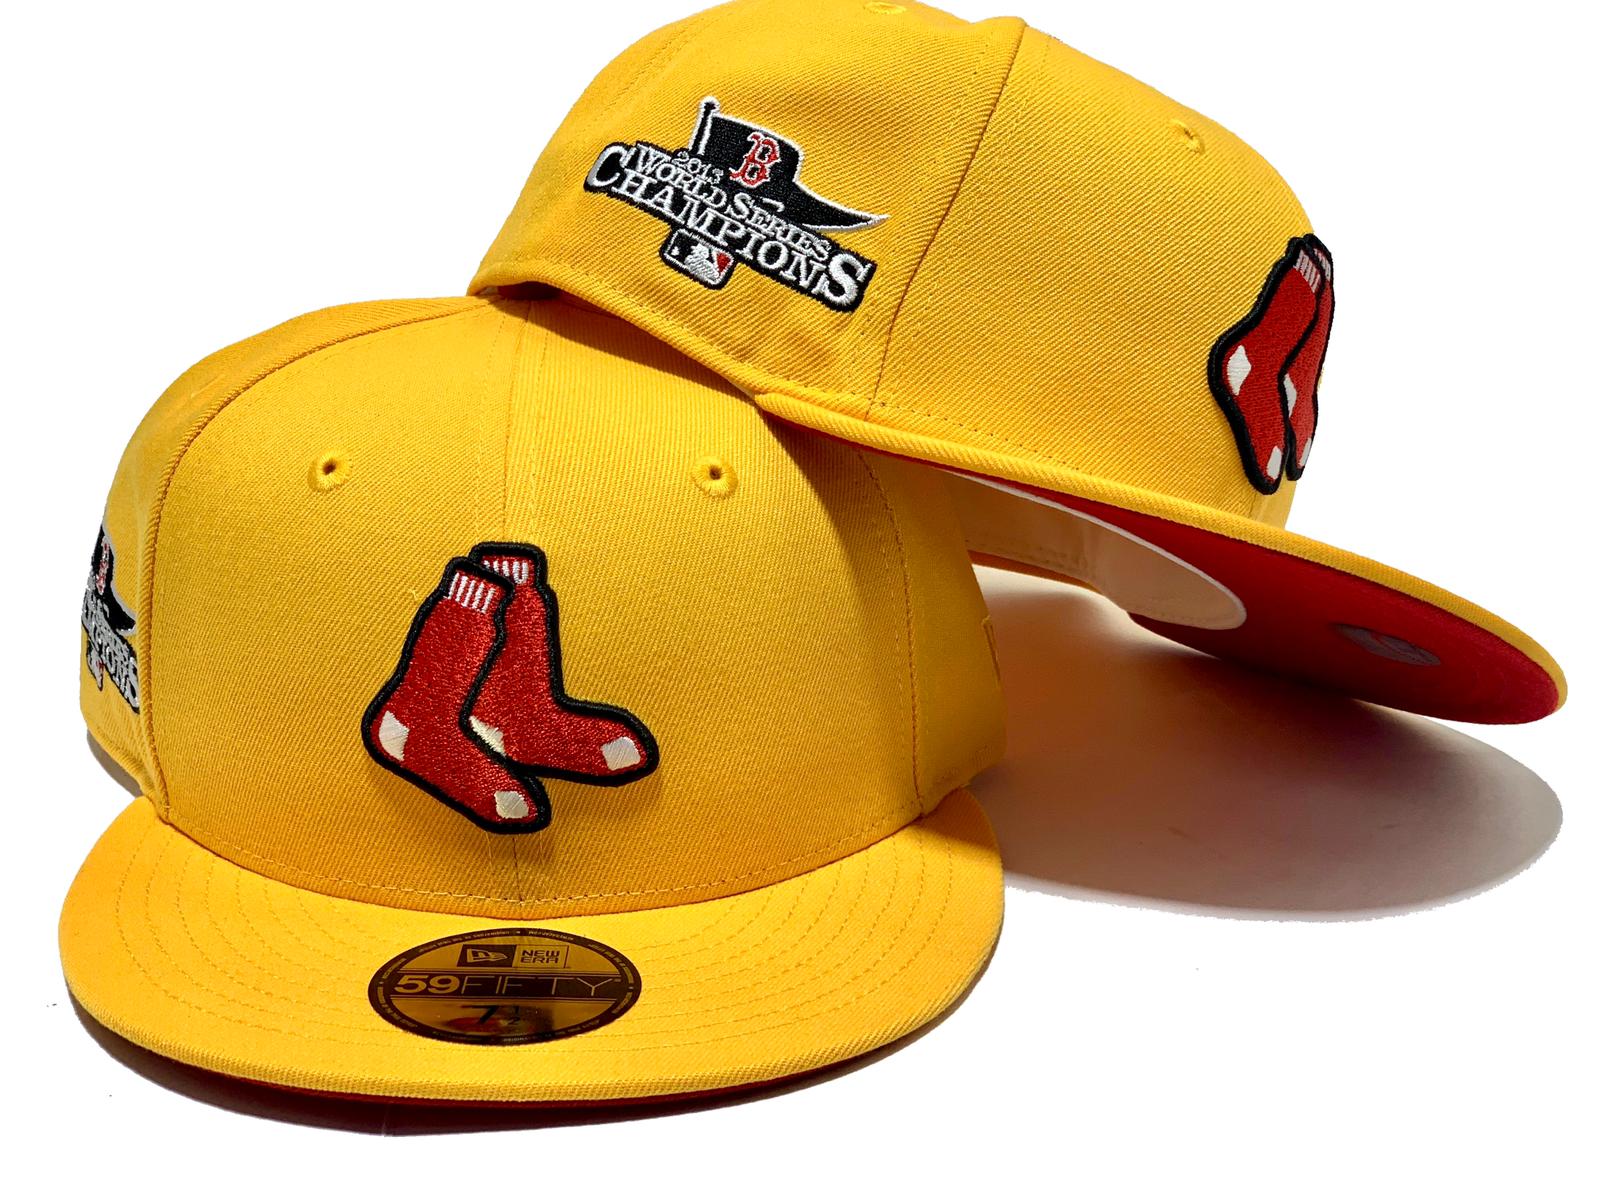 Boston Red Sox - Yellow is our color.